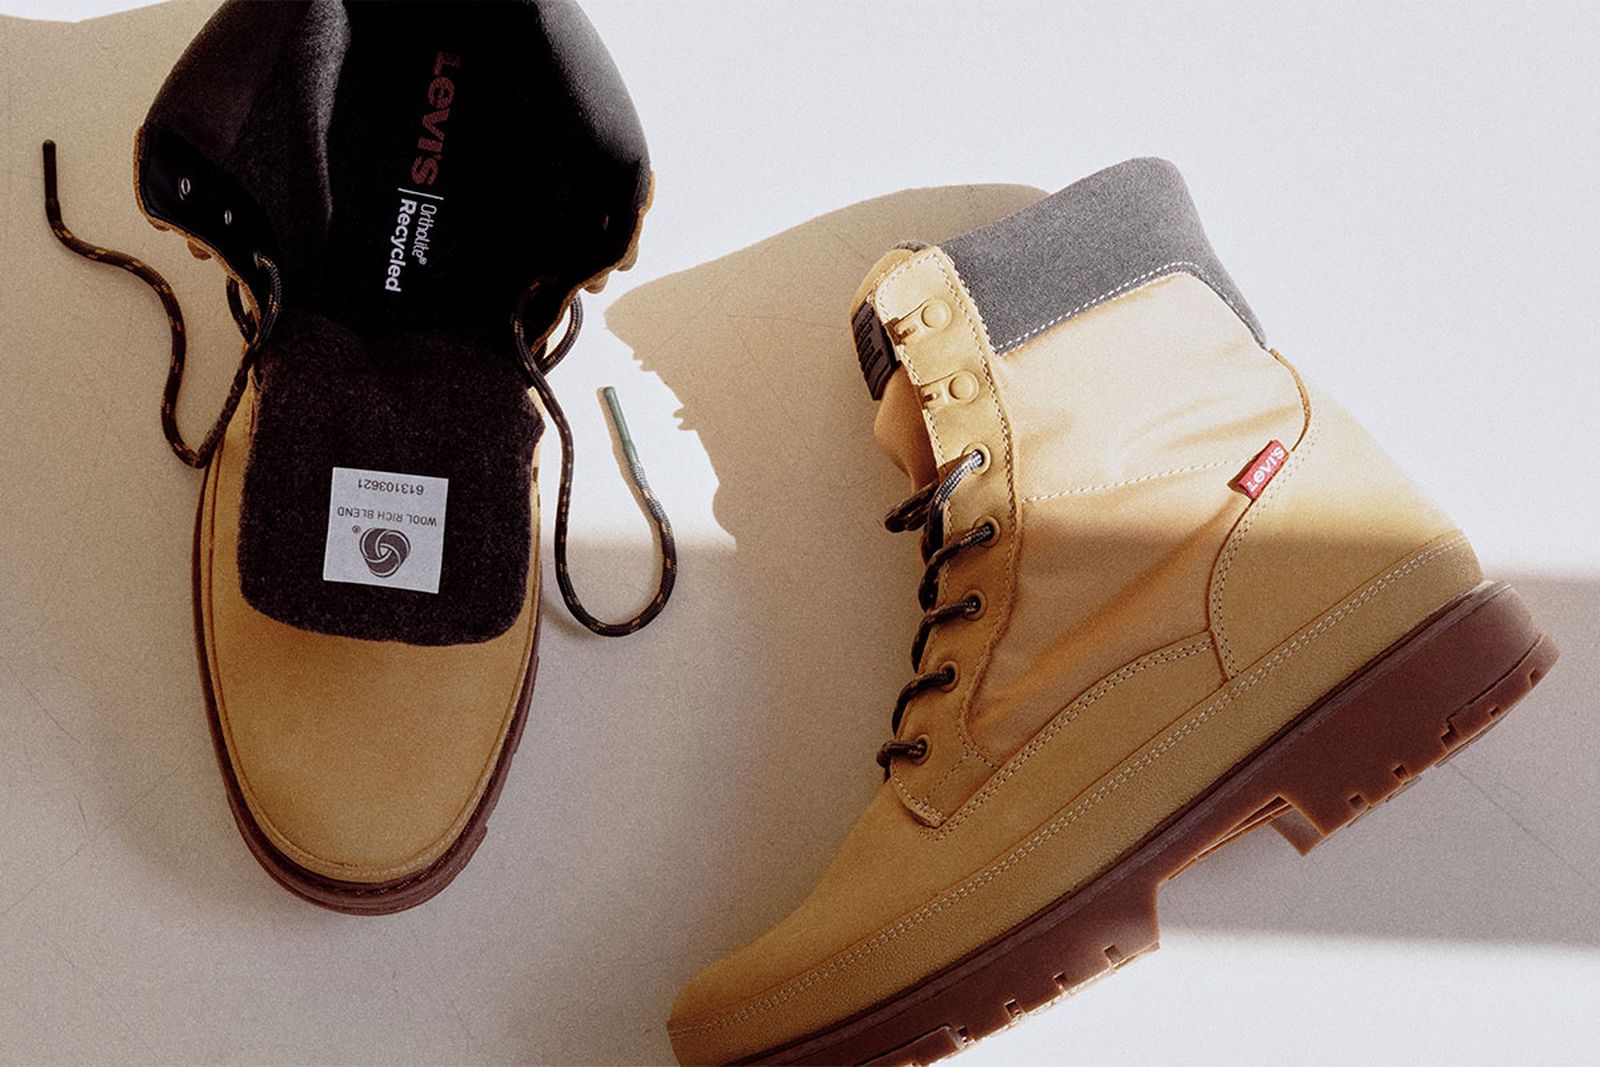 Levi's Eco-Conscious Torsten Boot Is Lined With Merino Wool